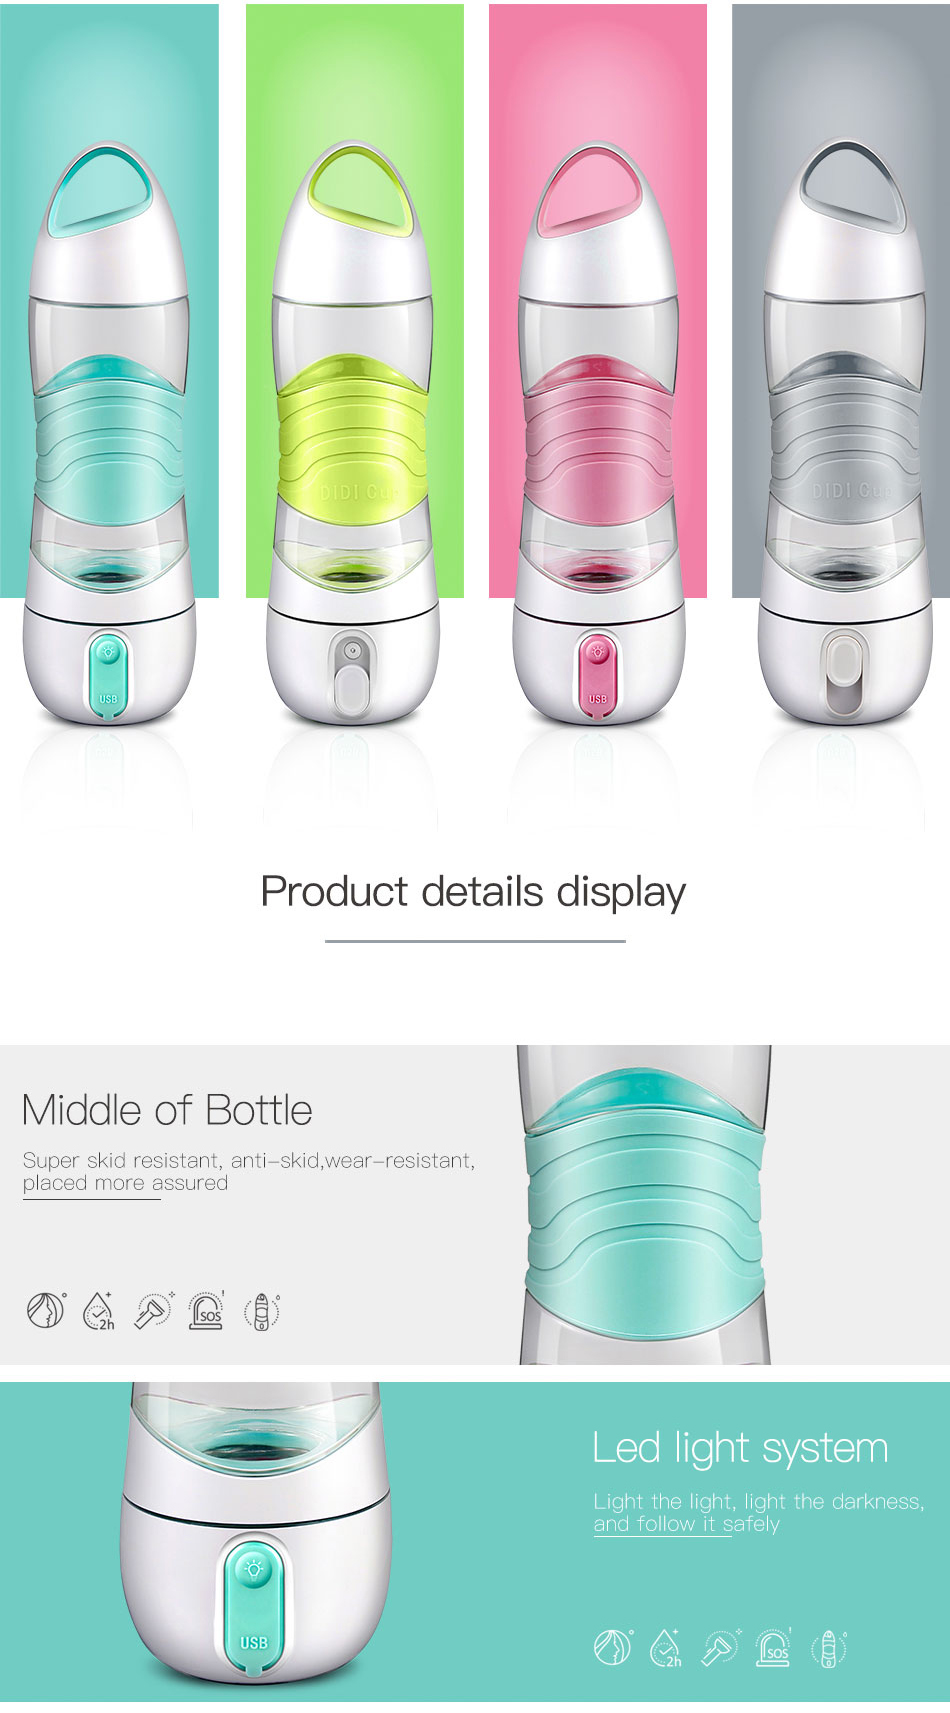 KCASA-DDH8 Portable USB Air Humidifier Spray 400ML Water Bottles Creative Outdoor Drinking Cup Sports Spray Bottle with Light 66